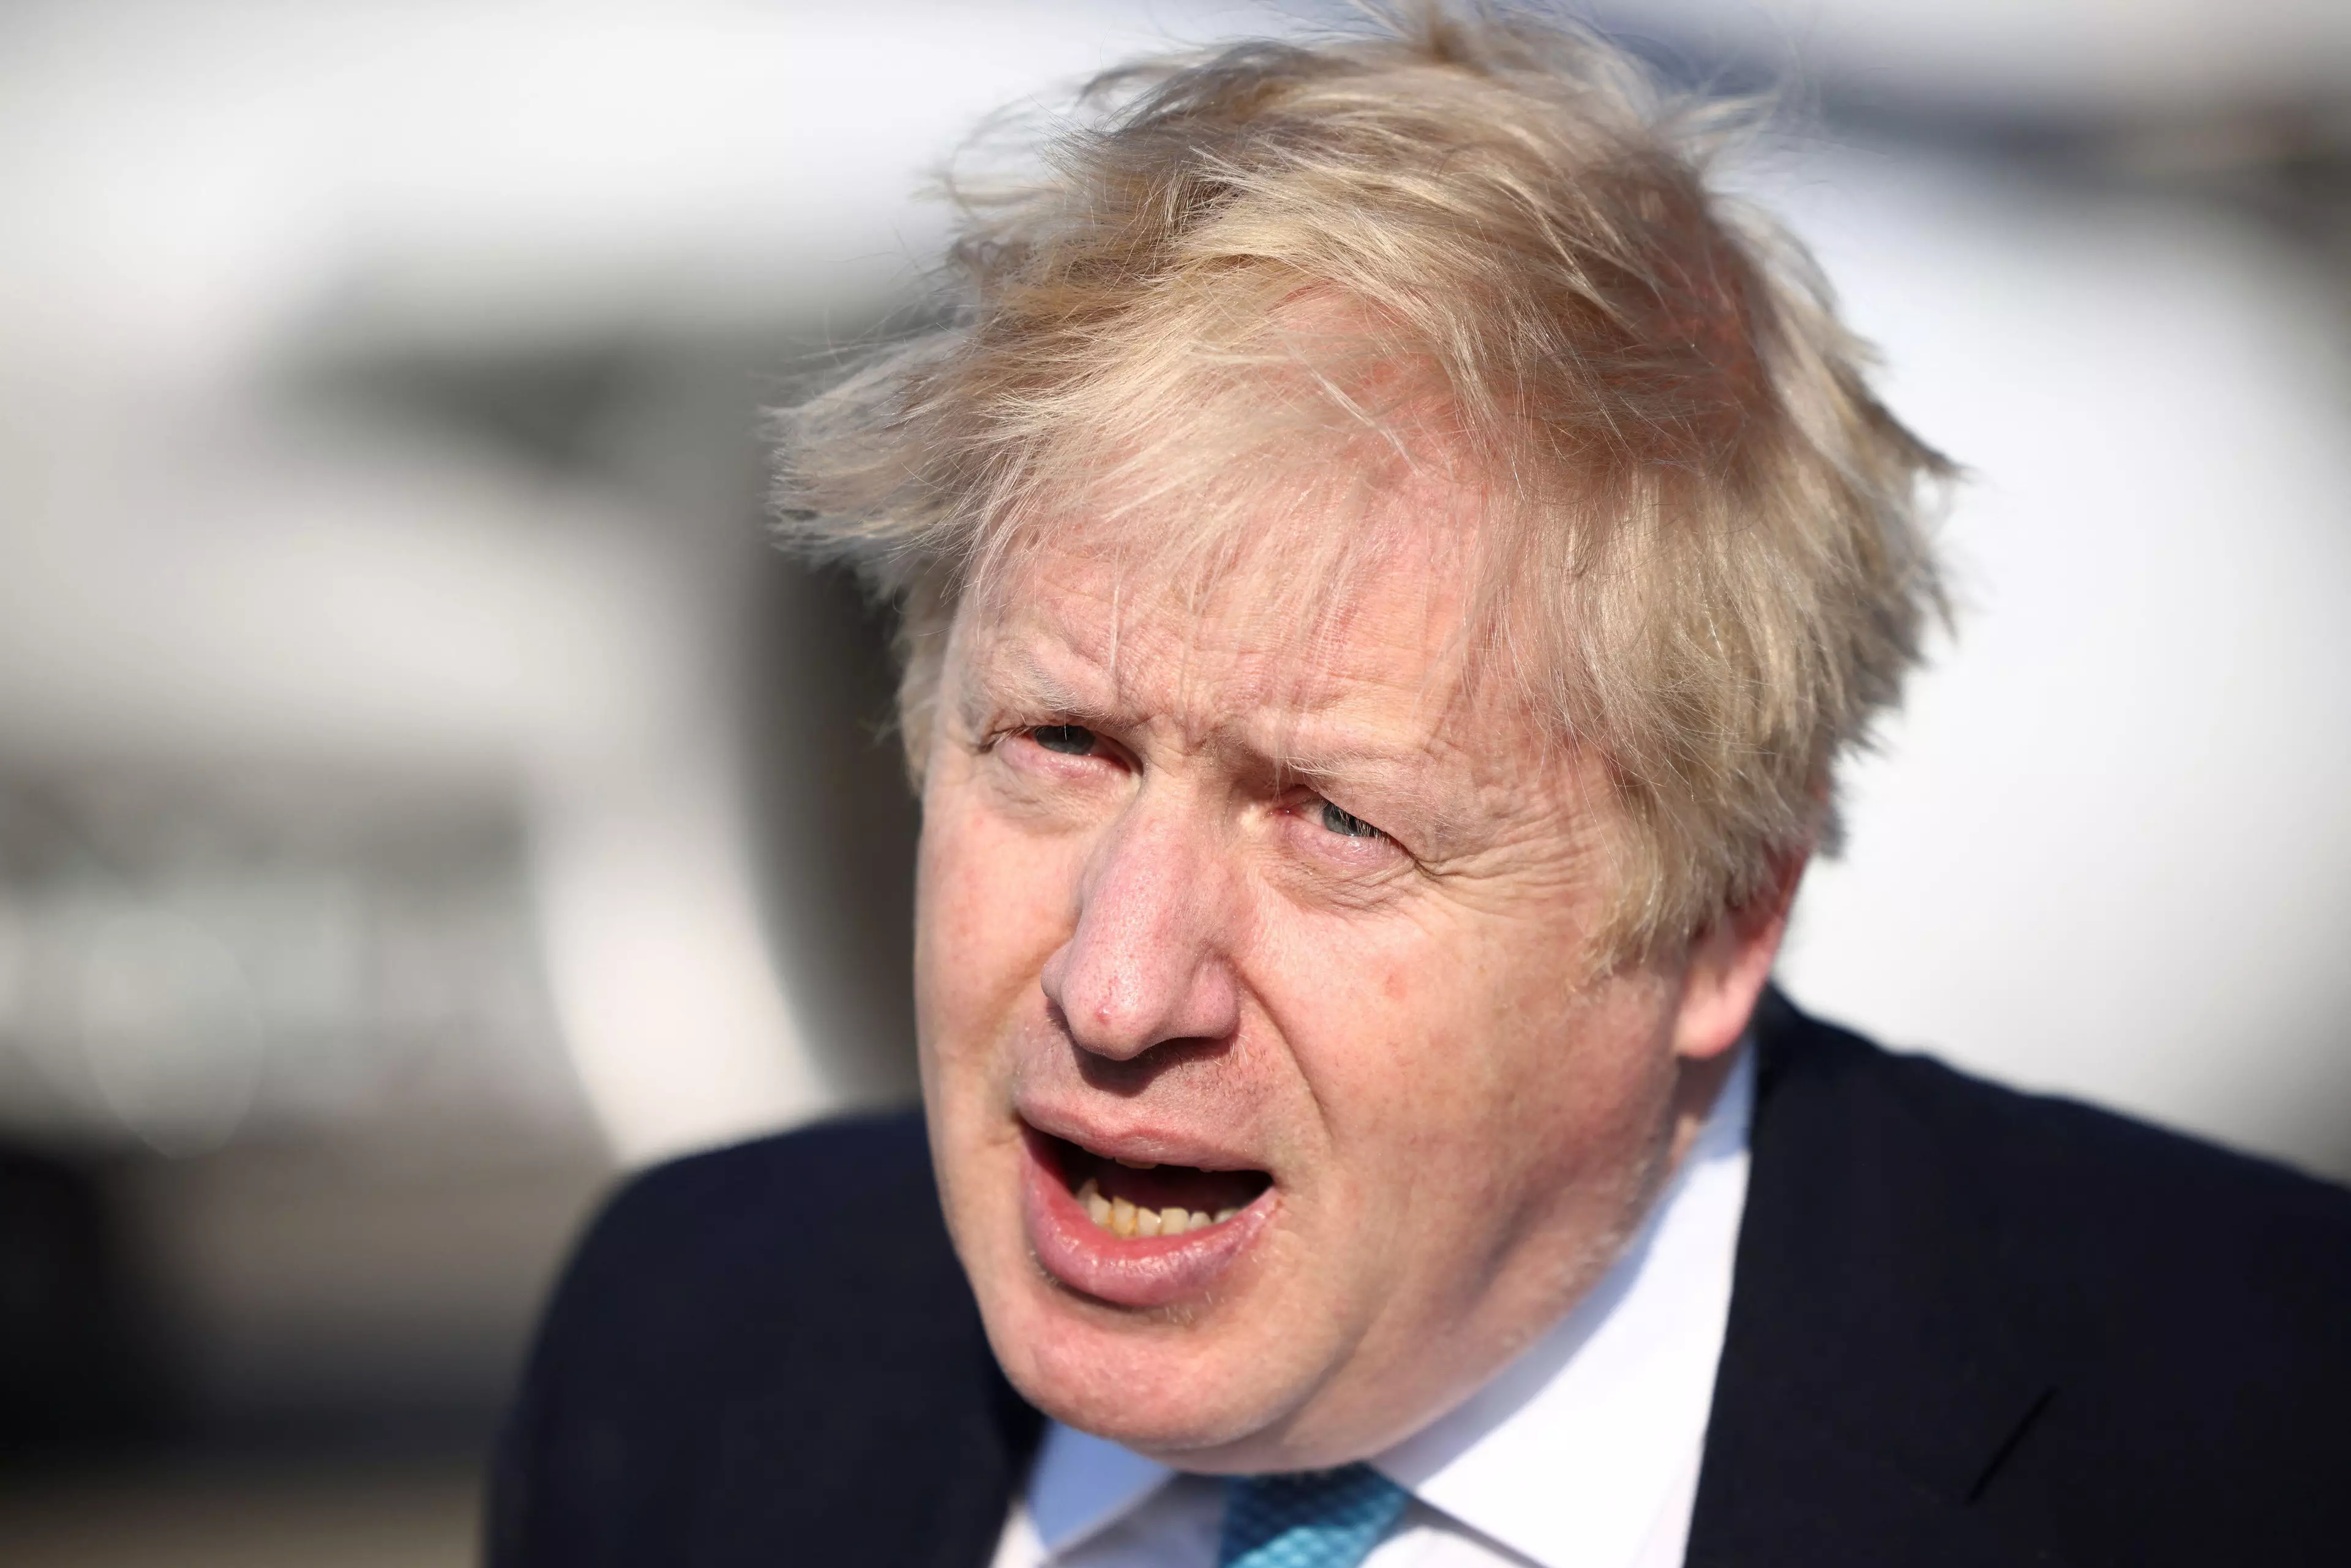 Boris Johnson has called for tighter sanctions on Russia.